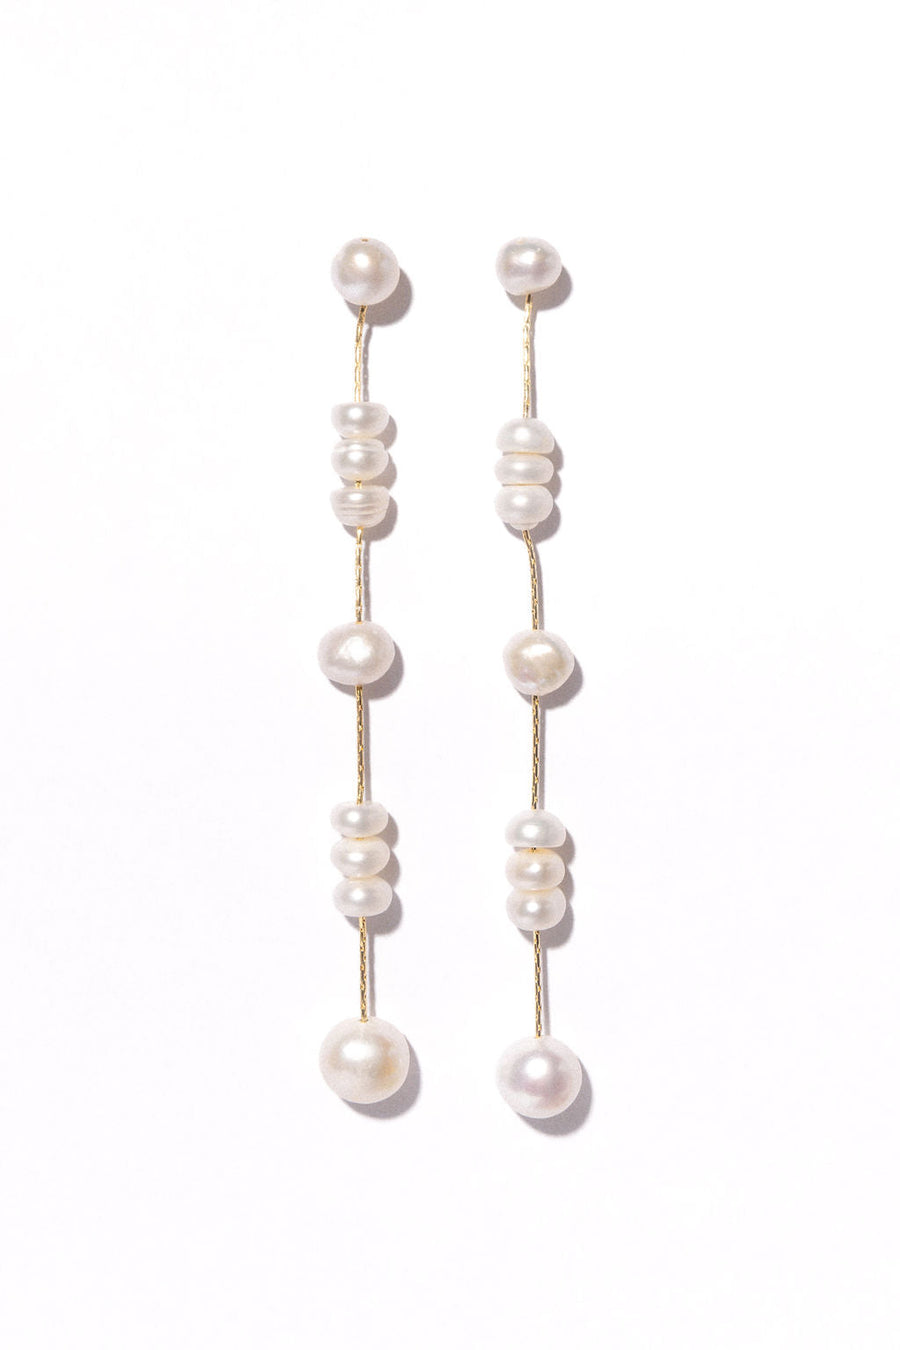 DLUXCA Jewelry Gold / Pearl Copy of Maldives Nights Pearl Earrings